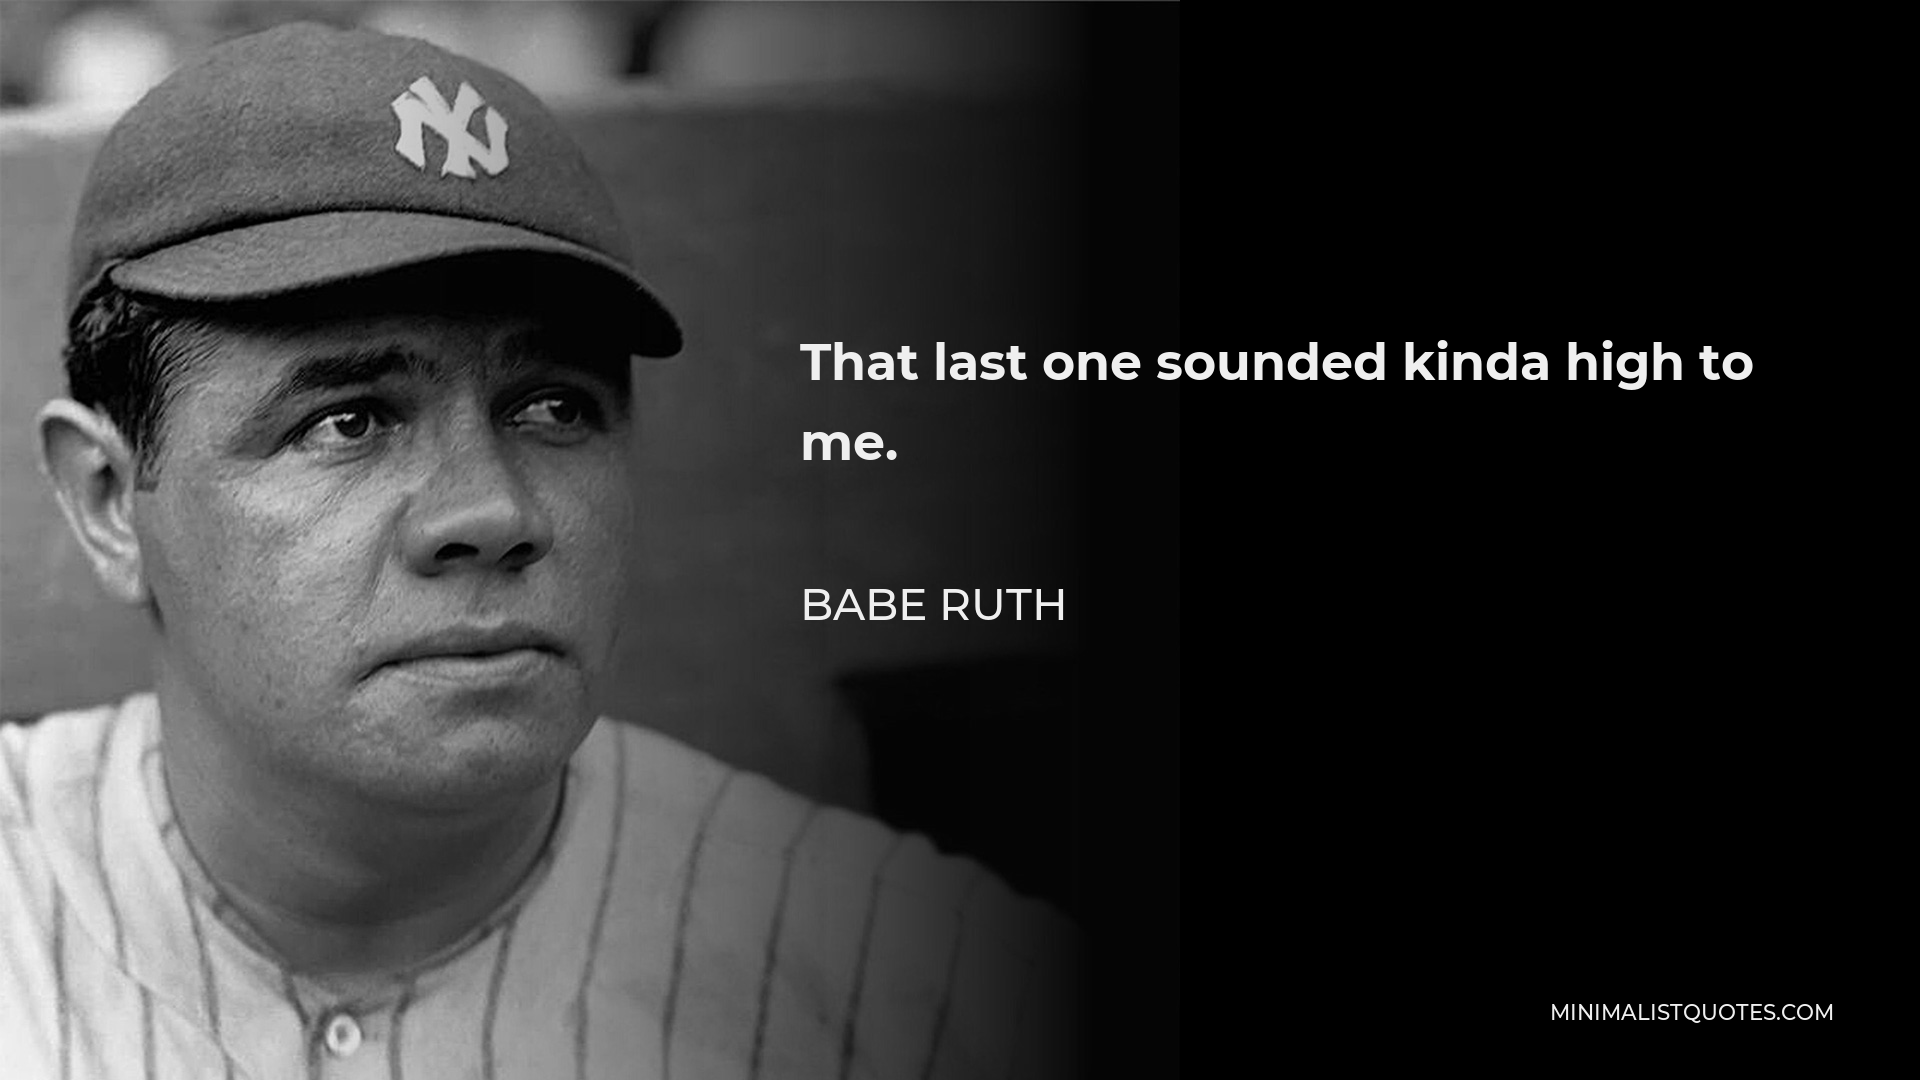 Babe Ruth Quote - That last one sounded kinda high to me.